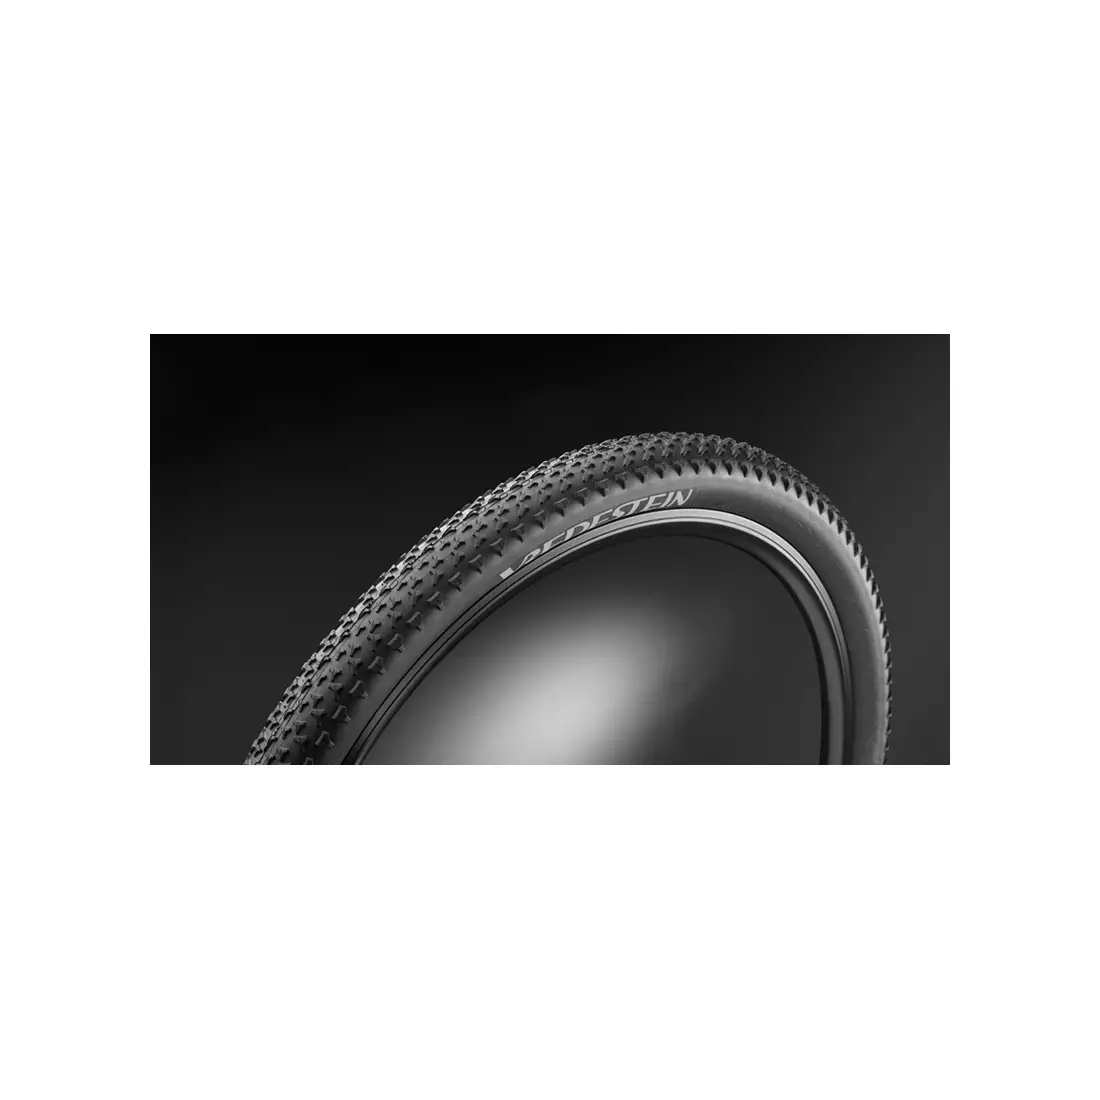 VREDESTEIN SPOTTED CAT SUPERLITE Mtb bicycle tyre 29x2.00 (50-622) TPI120 475g black coiled VRD-29227